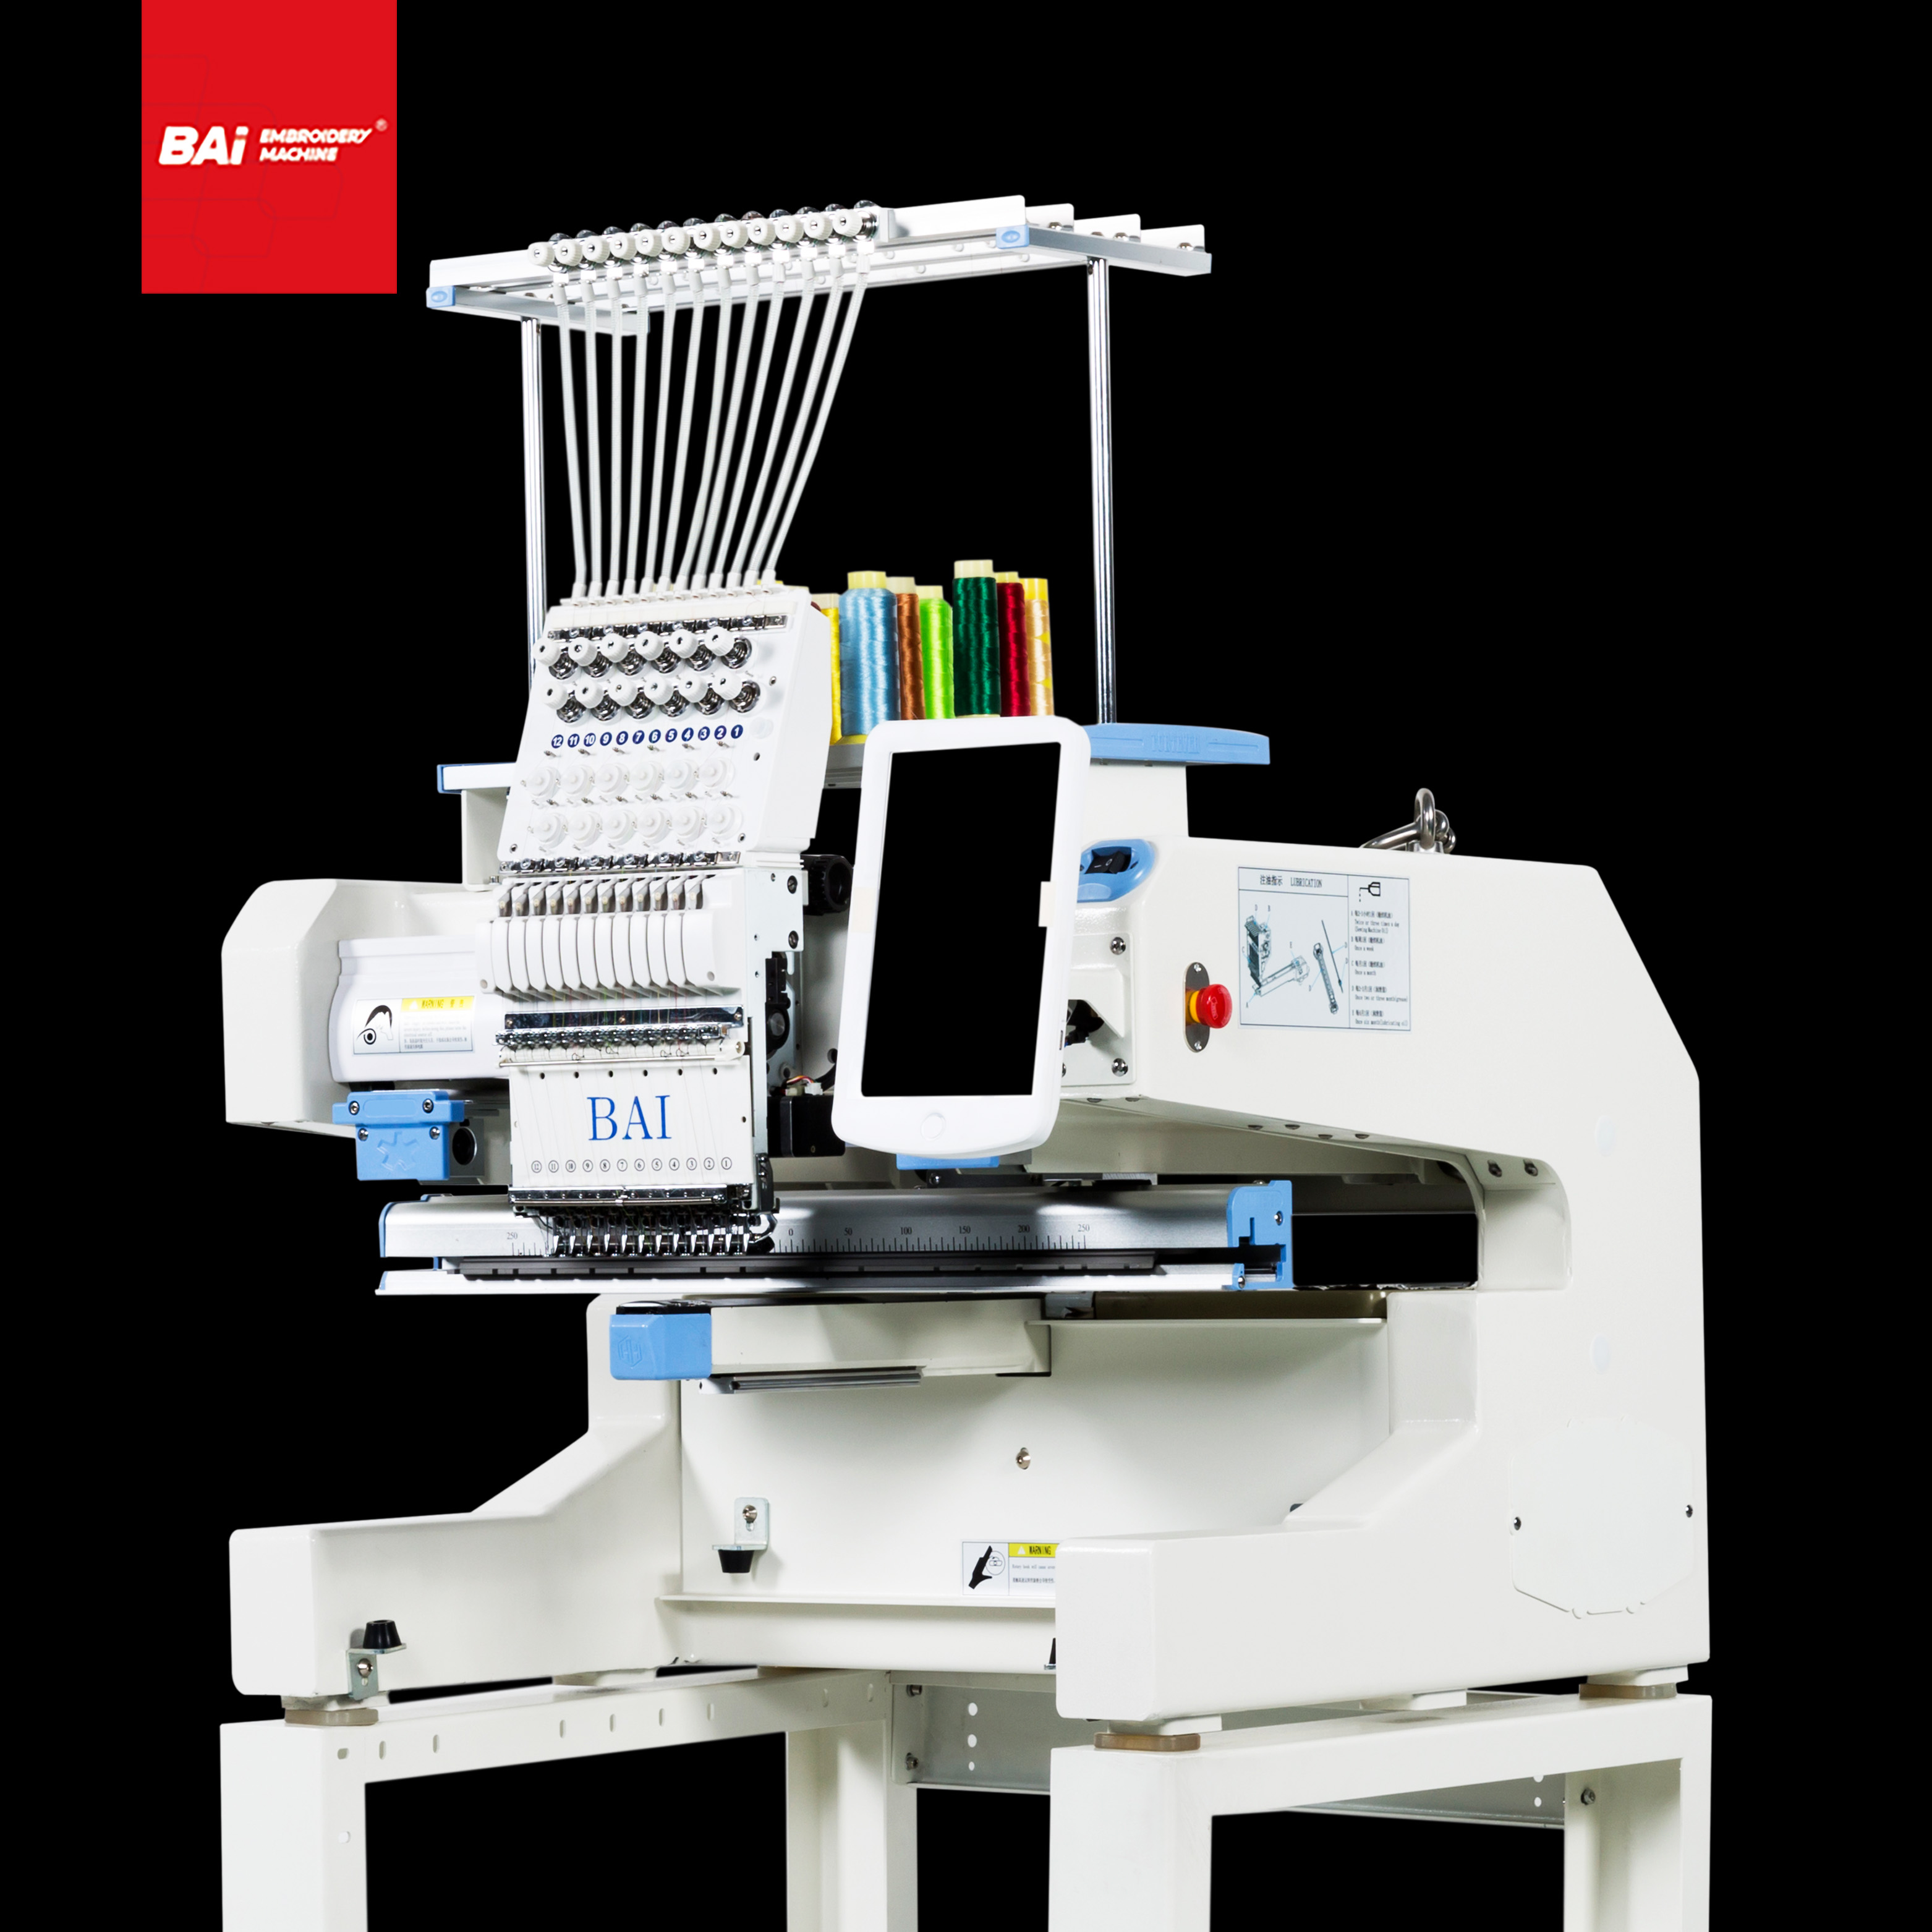 BAI Computer Controlled Embroidery Machines for Machine Embroidery Designs